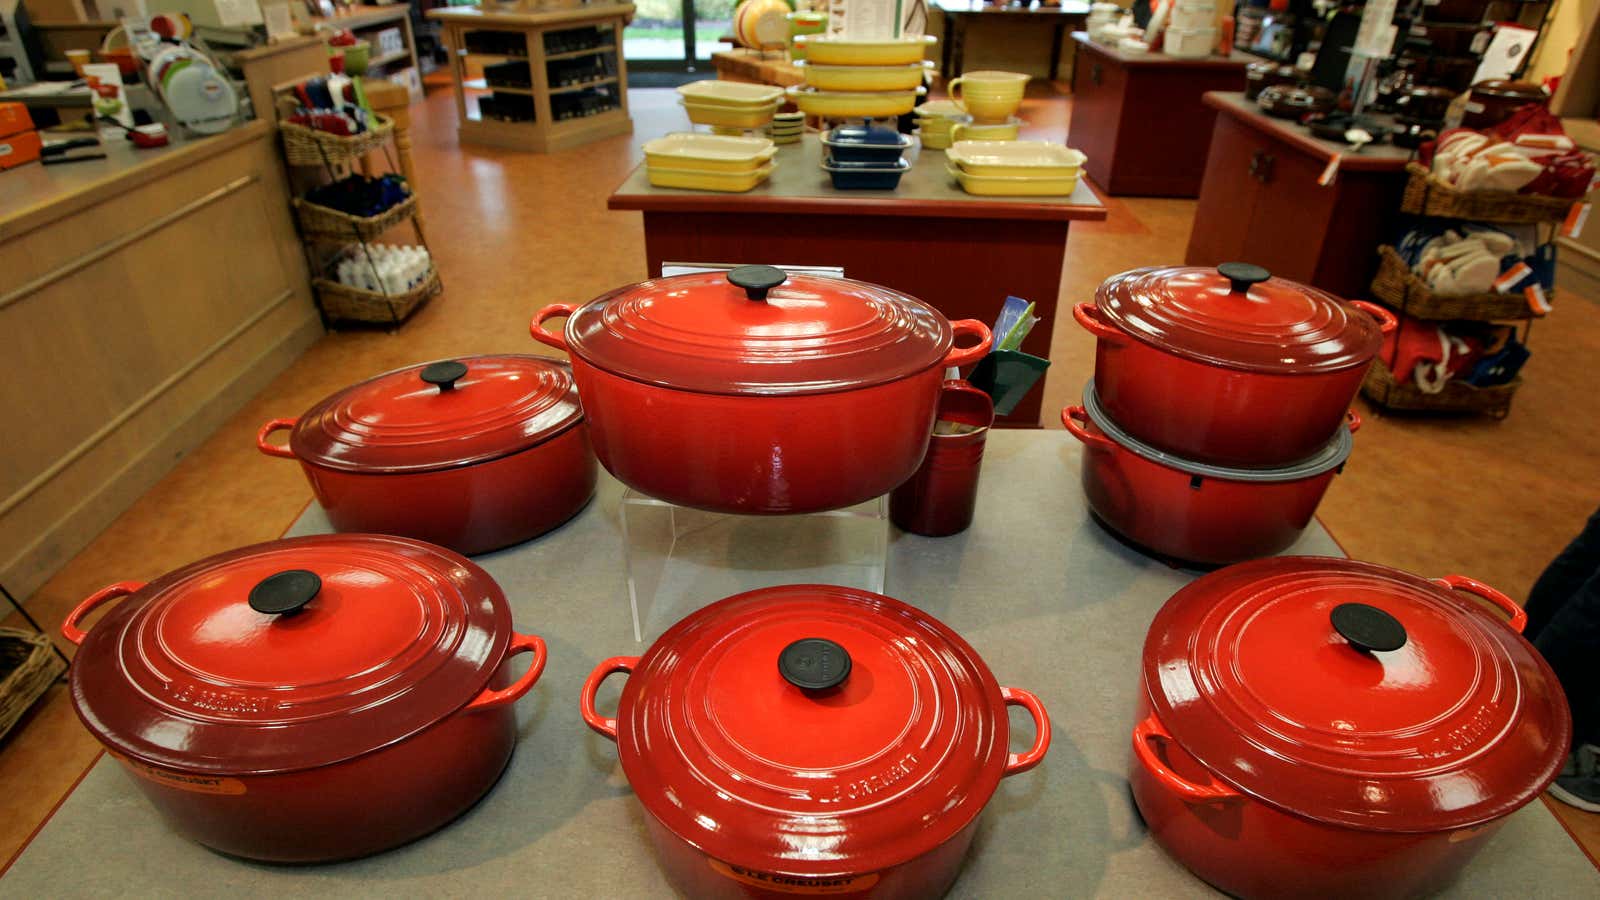 Covetable cookware.